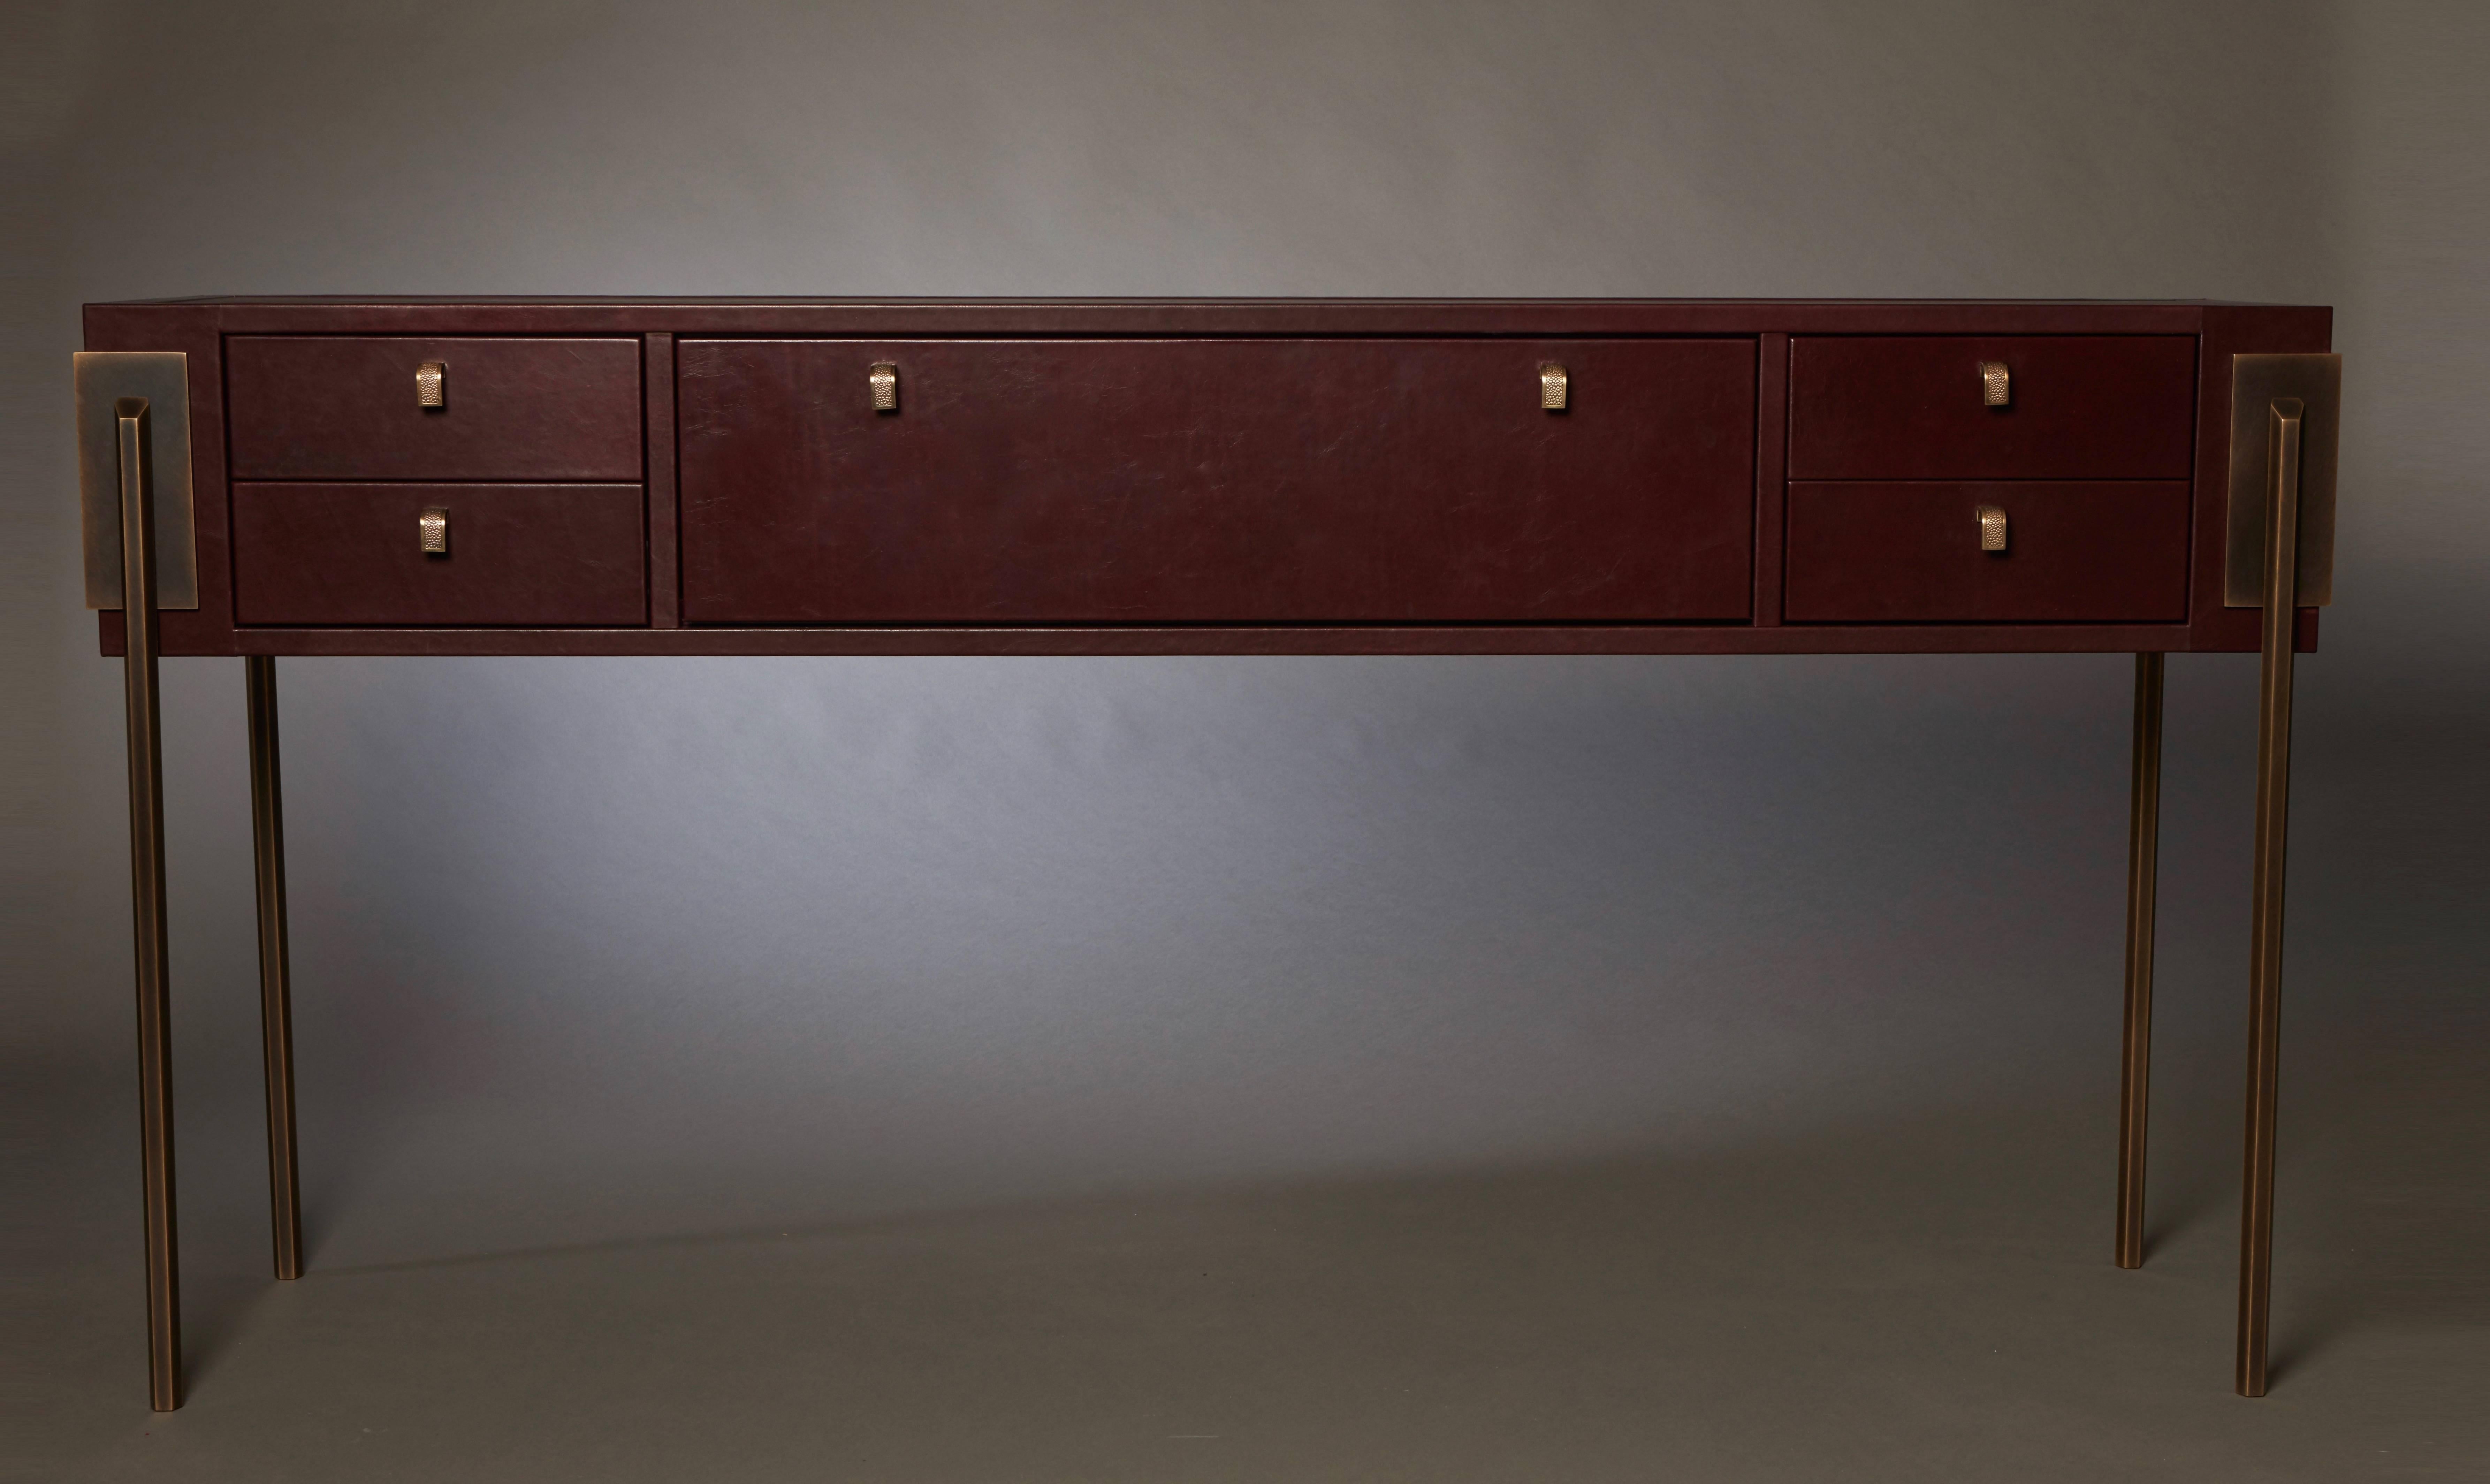 The 'Black Orchid' console draws inspiration from Art Deco architecture and features strong, yet elegant, proportions. The console is clad with a waxy aniline leather and is finished with shagreen cast bronze pulls. Its interior drawers are lined